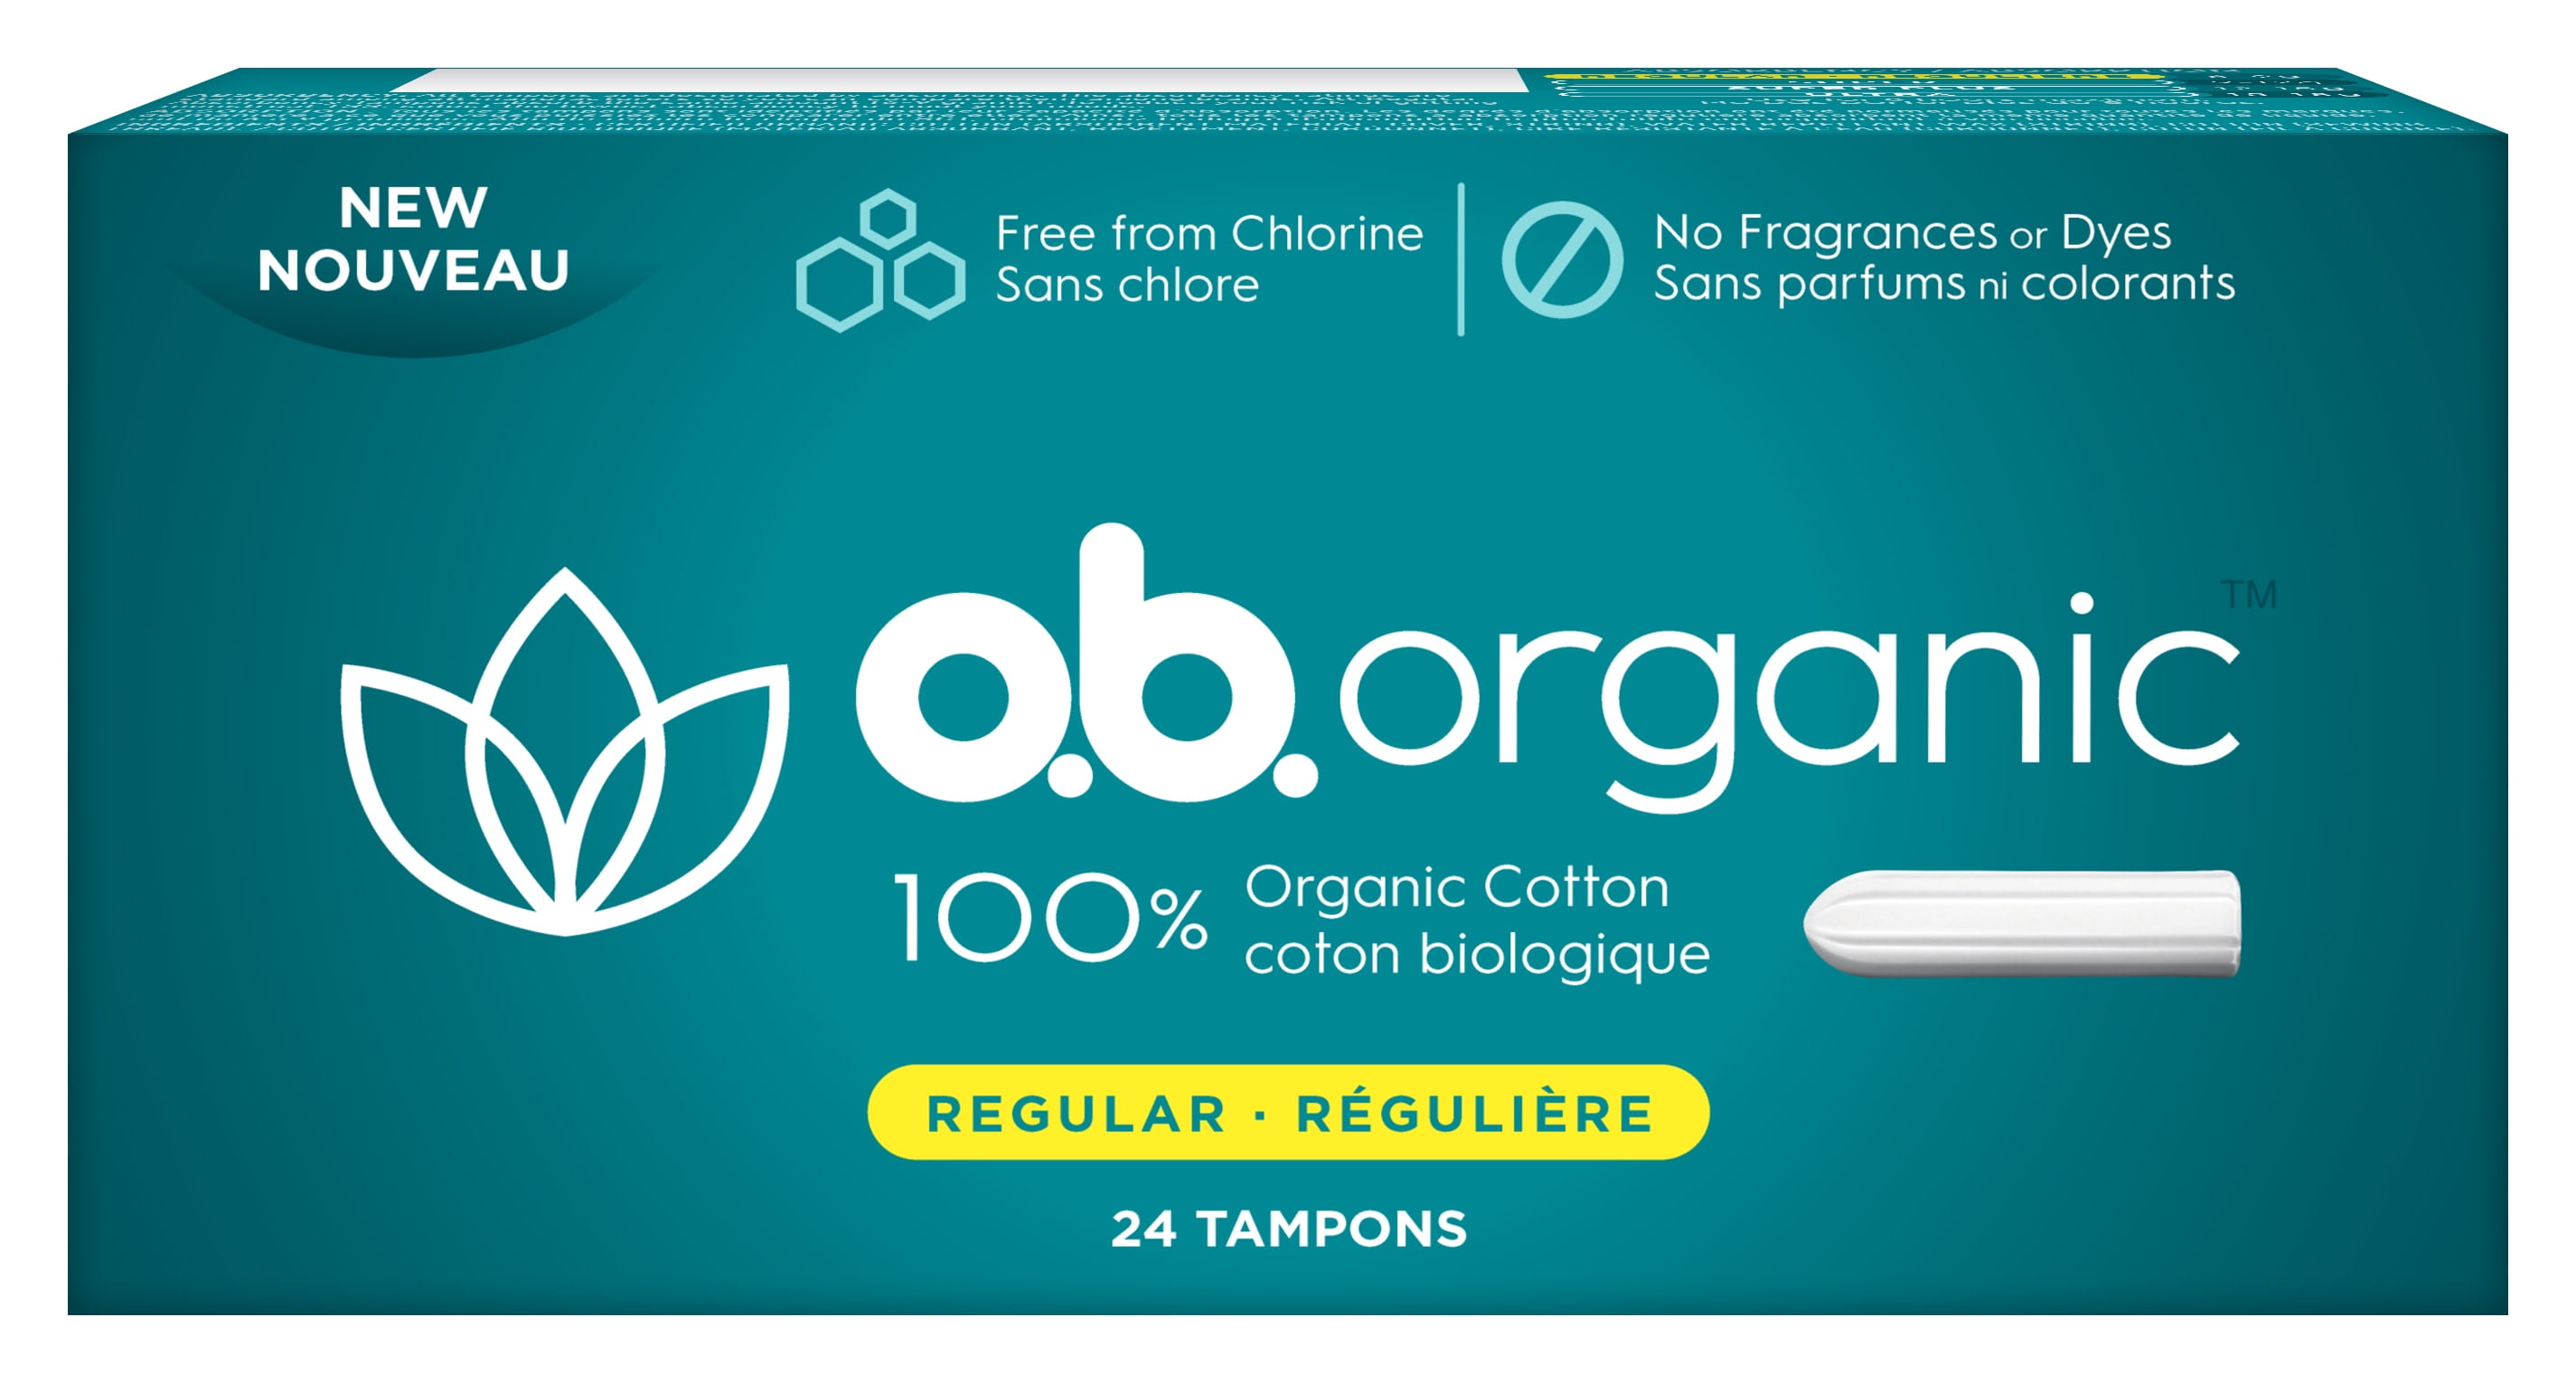 Equate Regular Absorbency Unscented Tampons with Plastic Applicators, 20 Ct  